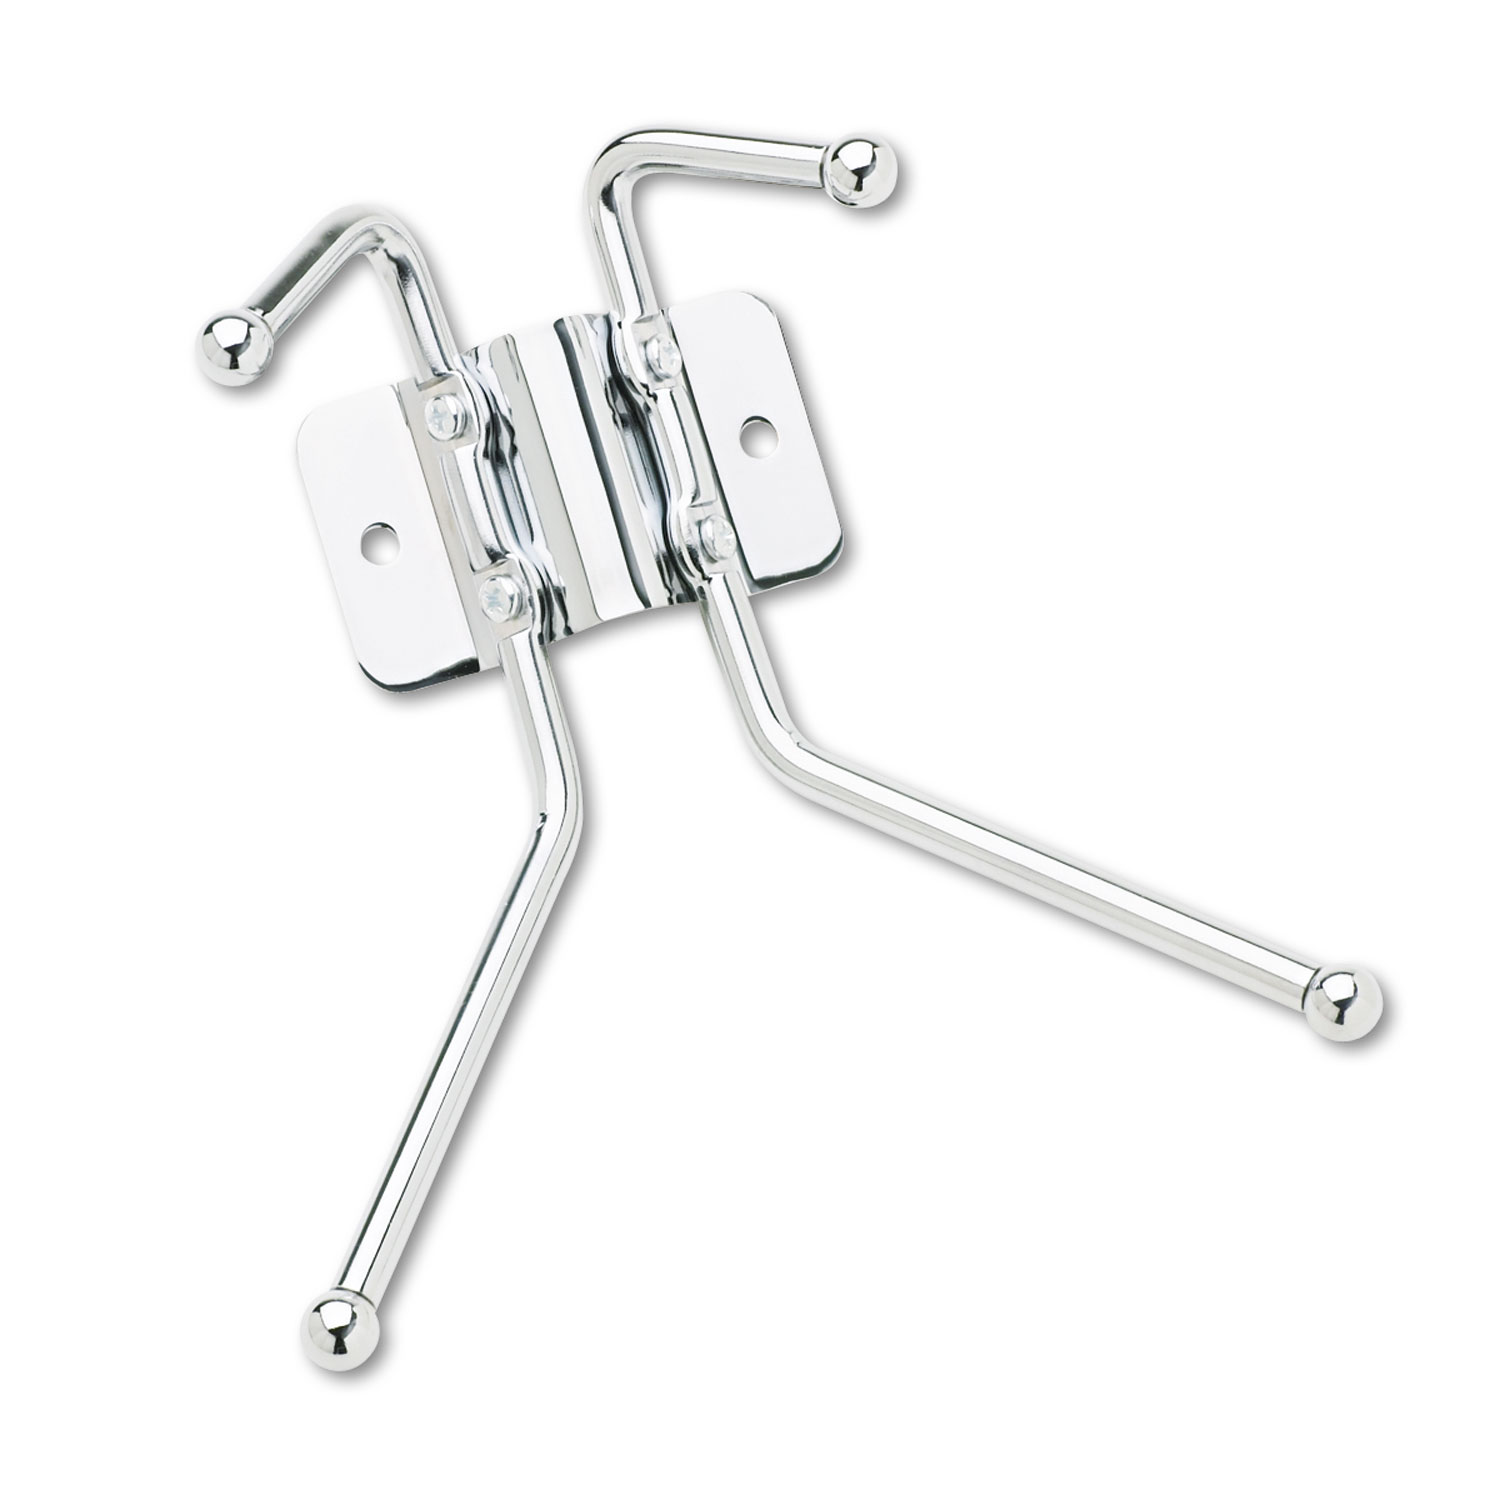  Safco 4160 Metal Wall Rack, Two Ball-Tipped Double-Hooks, 6.5w x 3d x 7h, Chrome Metal (SAF4160) 